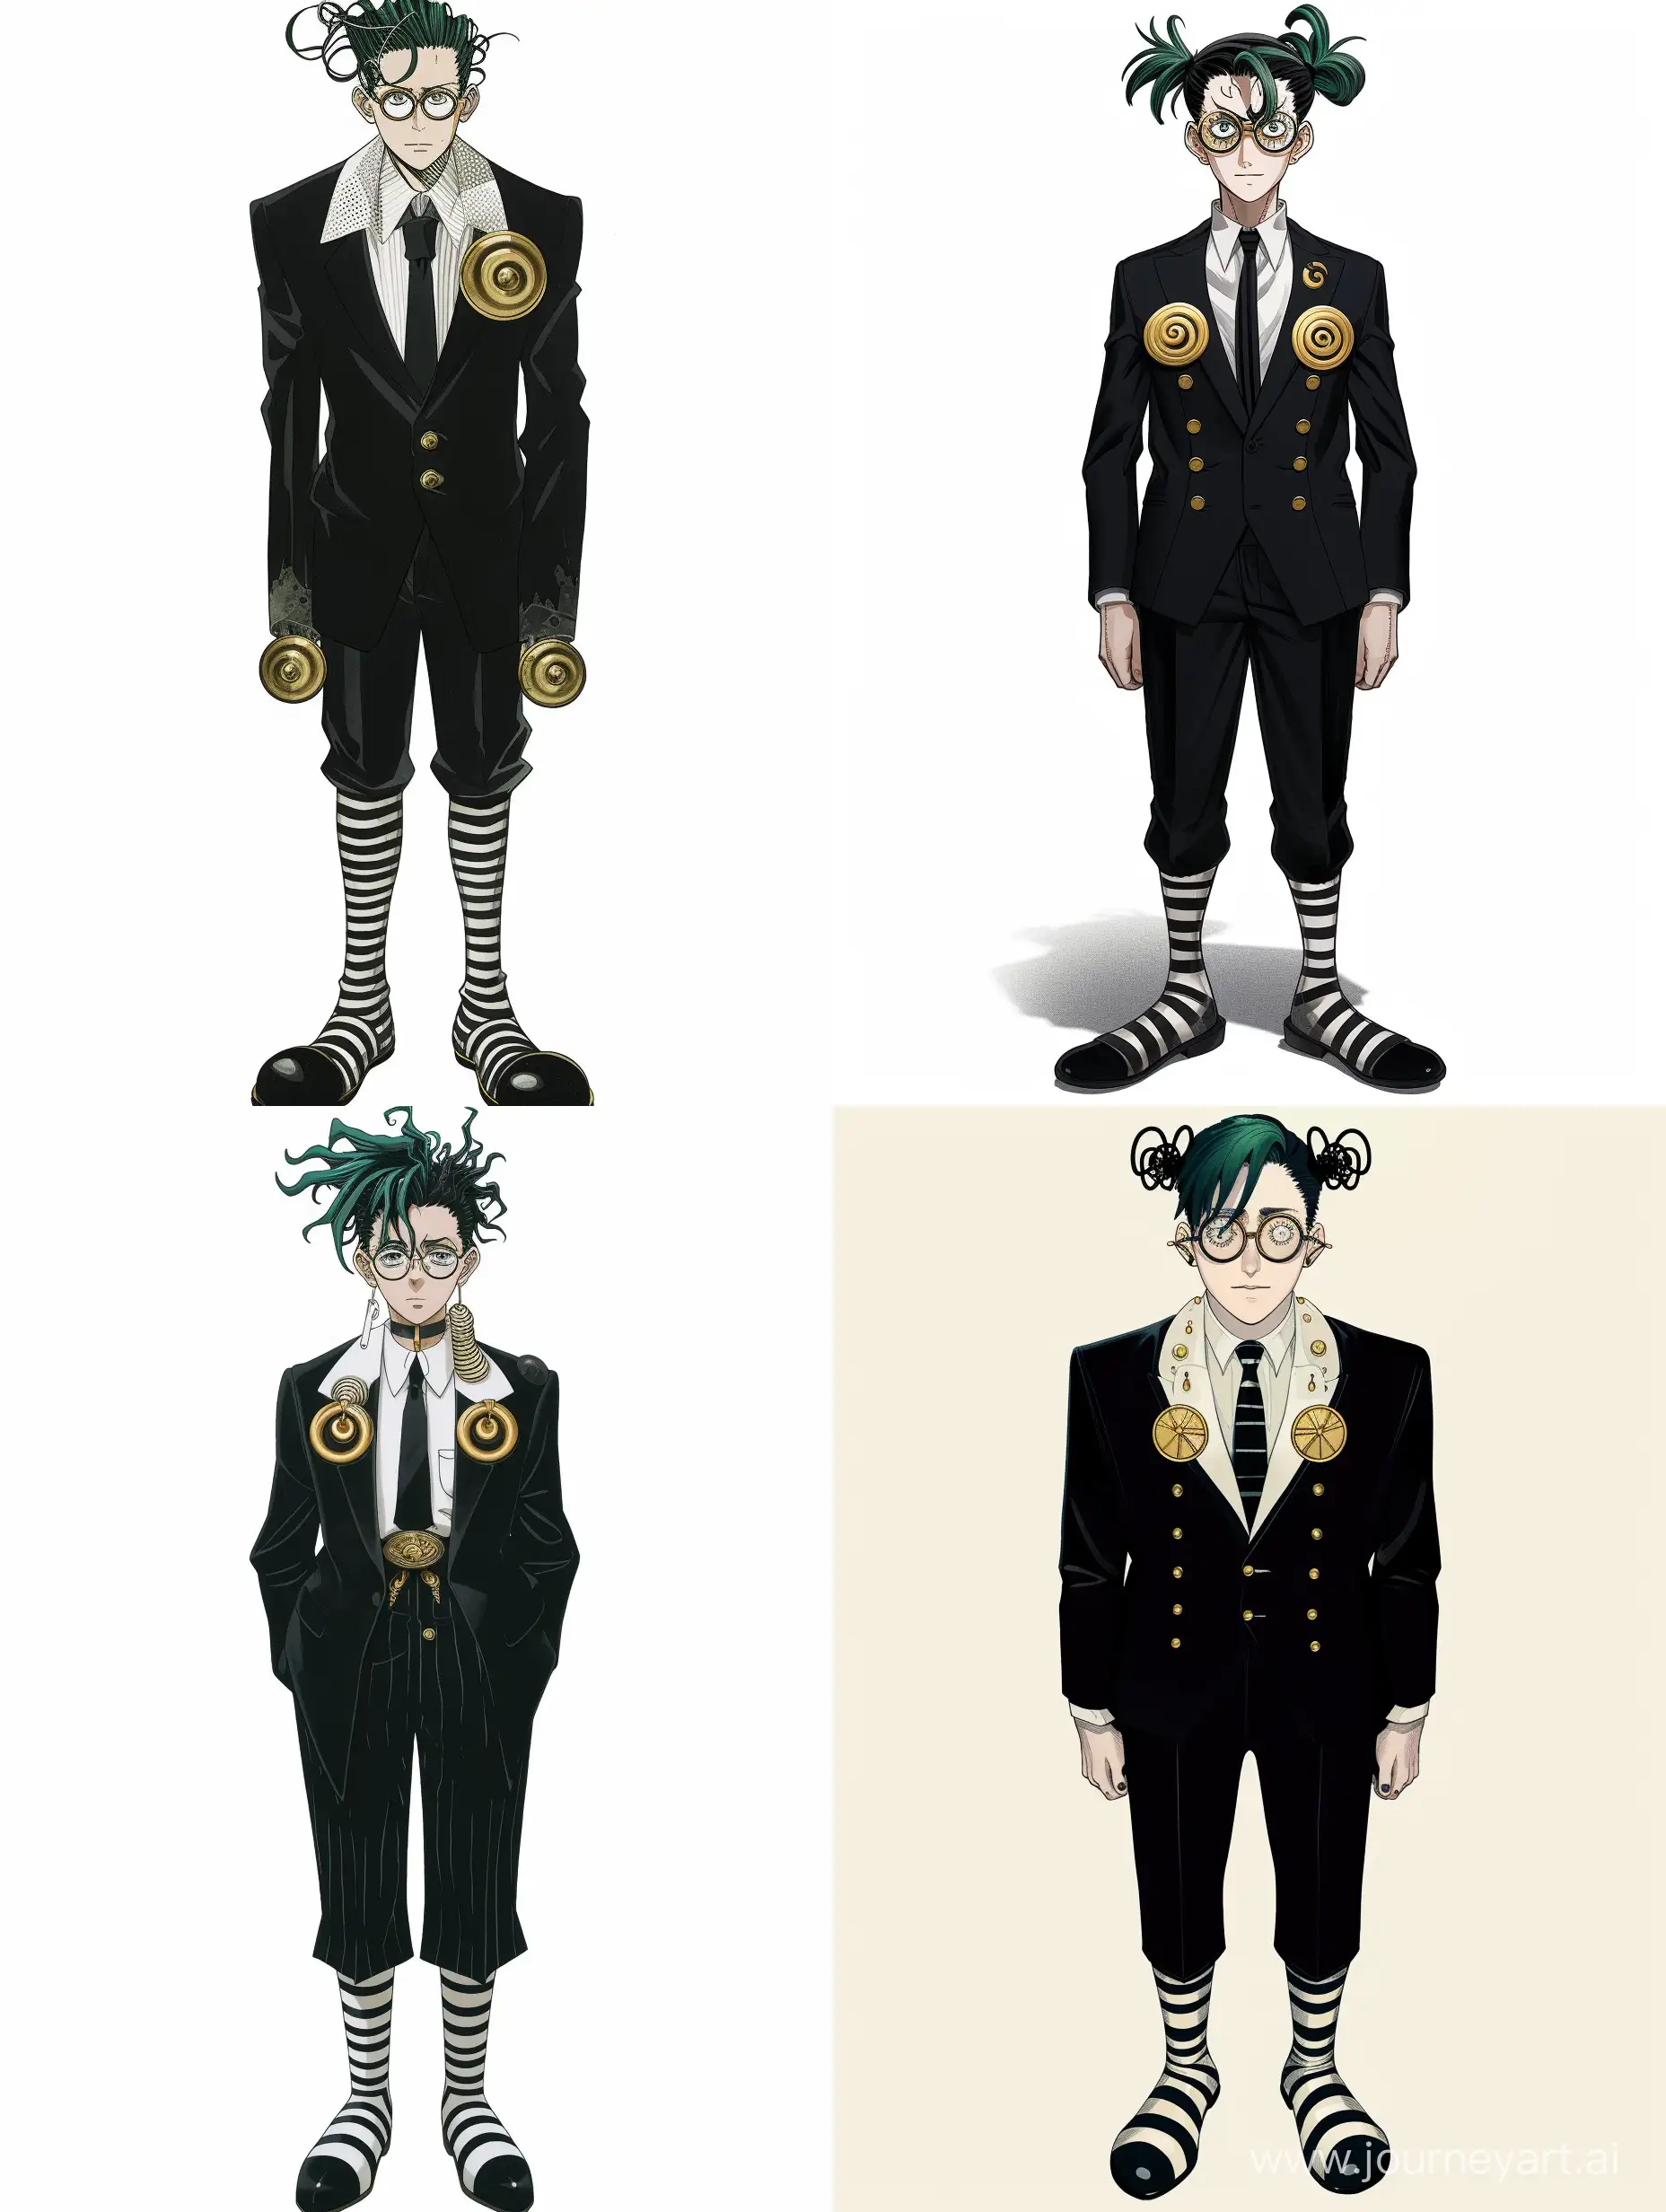 He is a tall and slender man with round glasses and combed black and green hair. He wears a black suit with two gold ornaments over a white shirt with an unusual collar and spiral projections at the edges, as well as an ordinary black tie. He always wears his striped shoes.